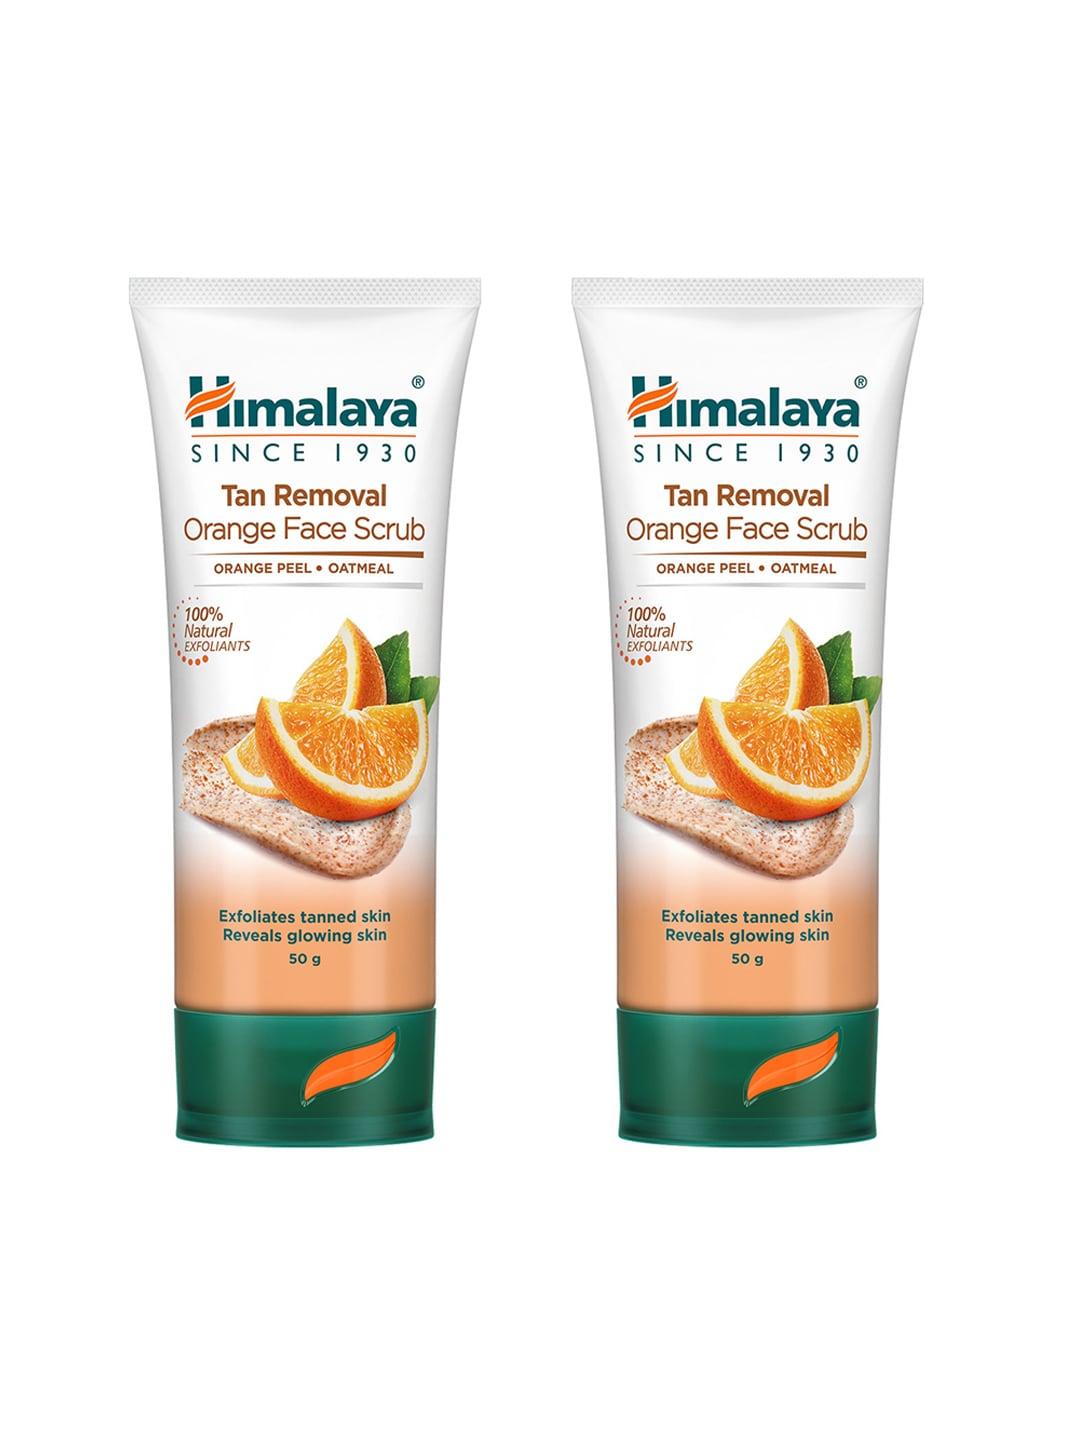 Himalaya Set of 2 Tan Removal Orange Face Scrub with Oatmeal for Glowing Skin - 50g Each